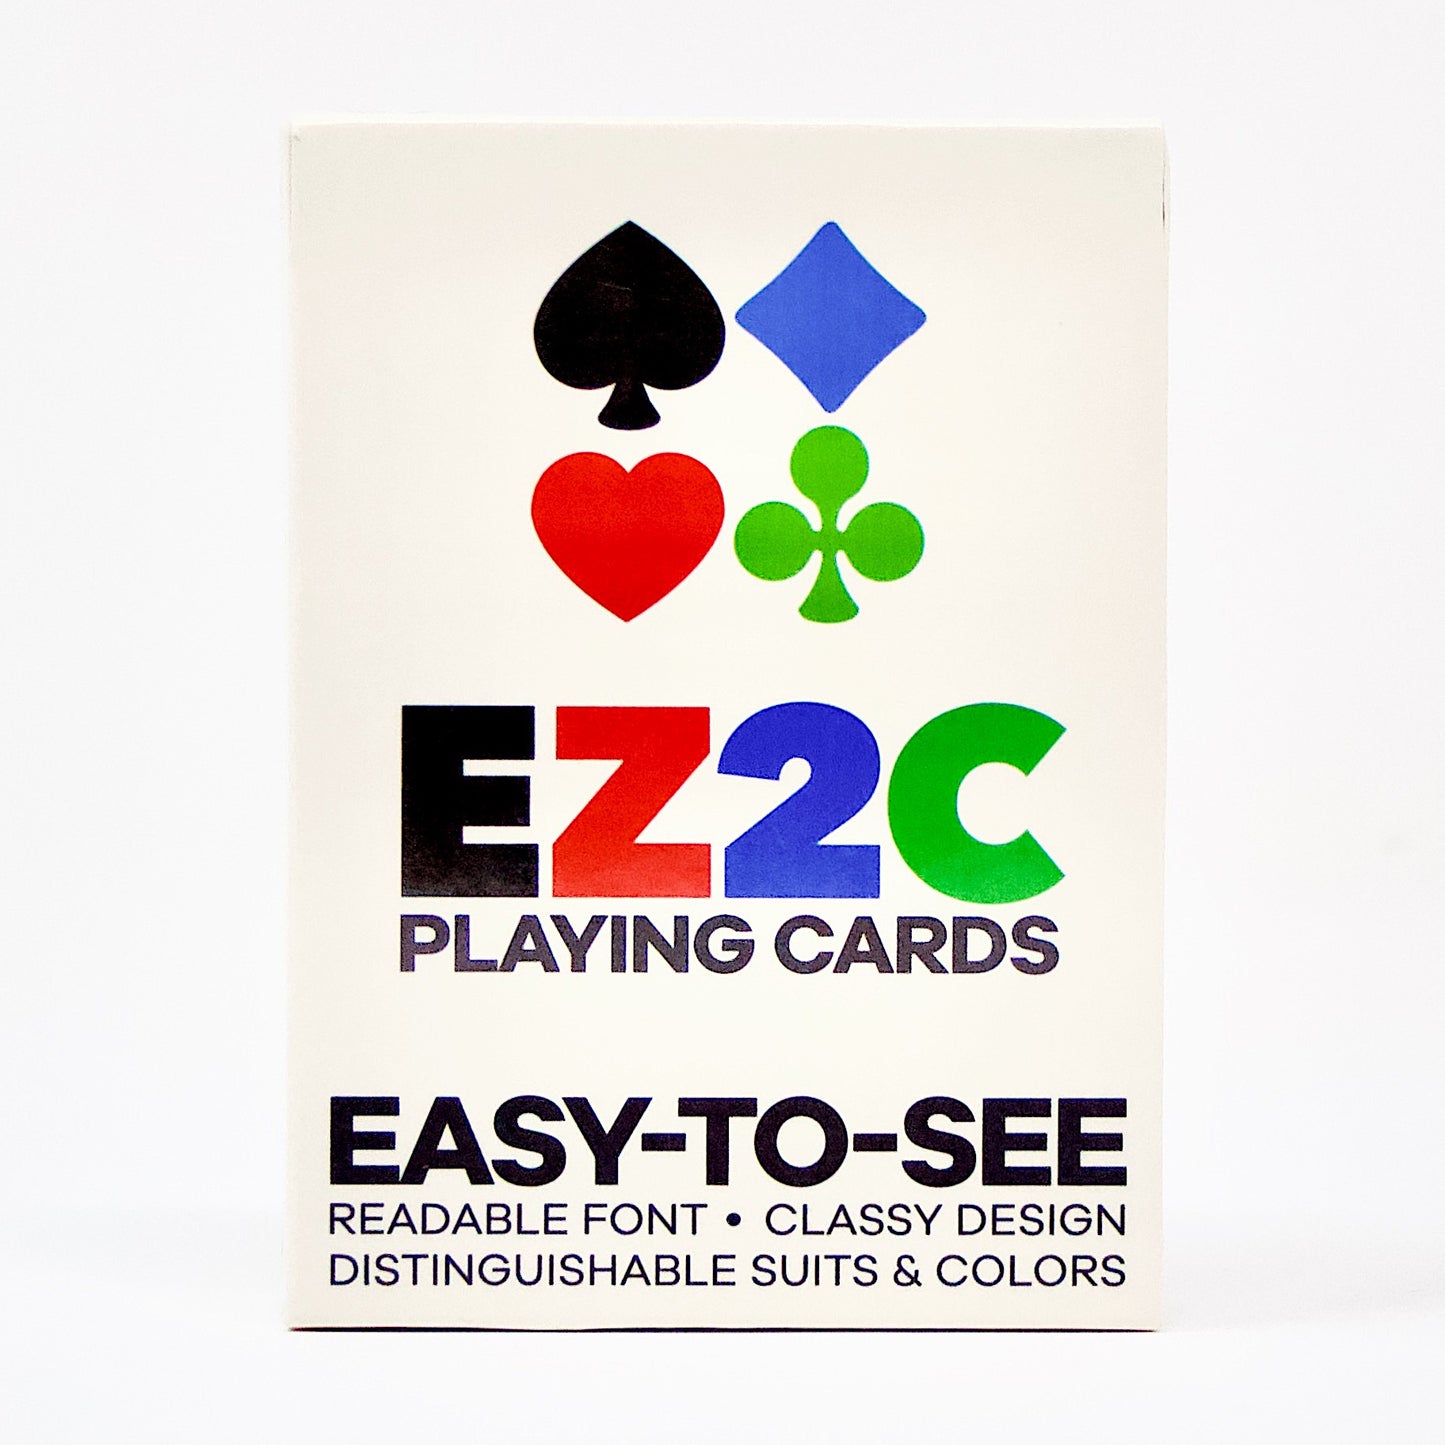 29424 | Easy-See Playing Cards: Readable font; Sophisticated suits in 4 colors